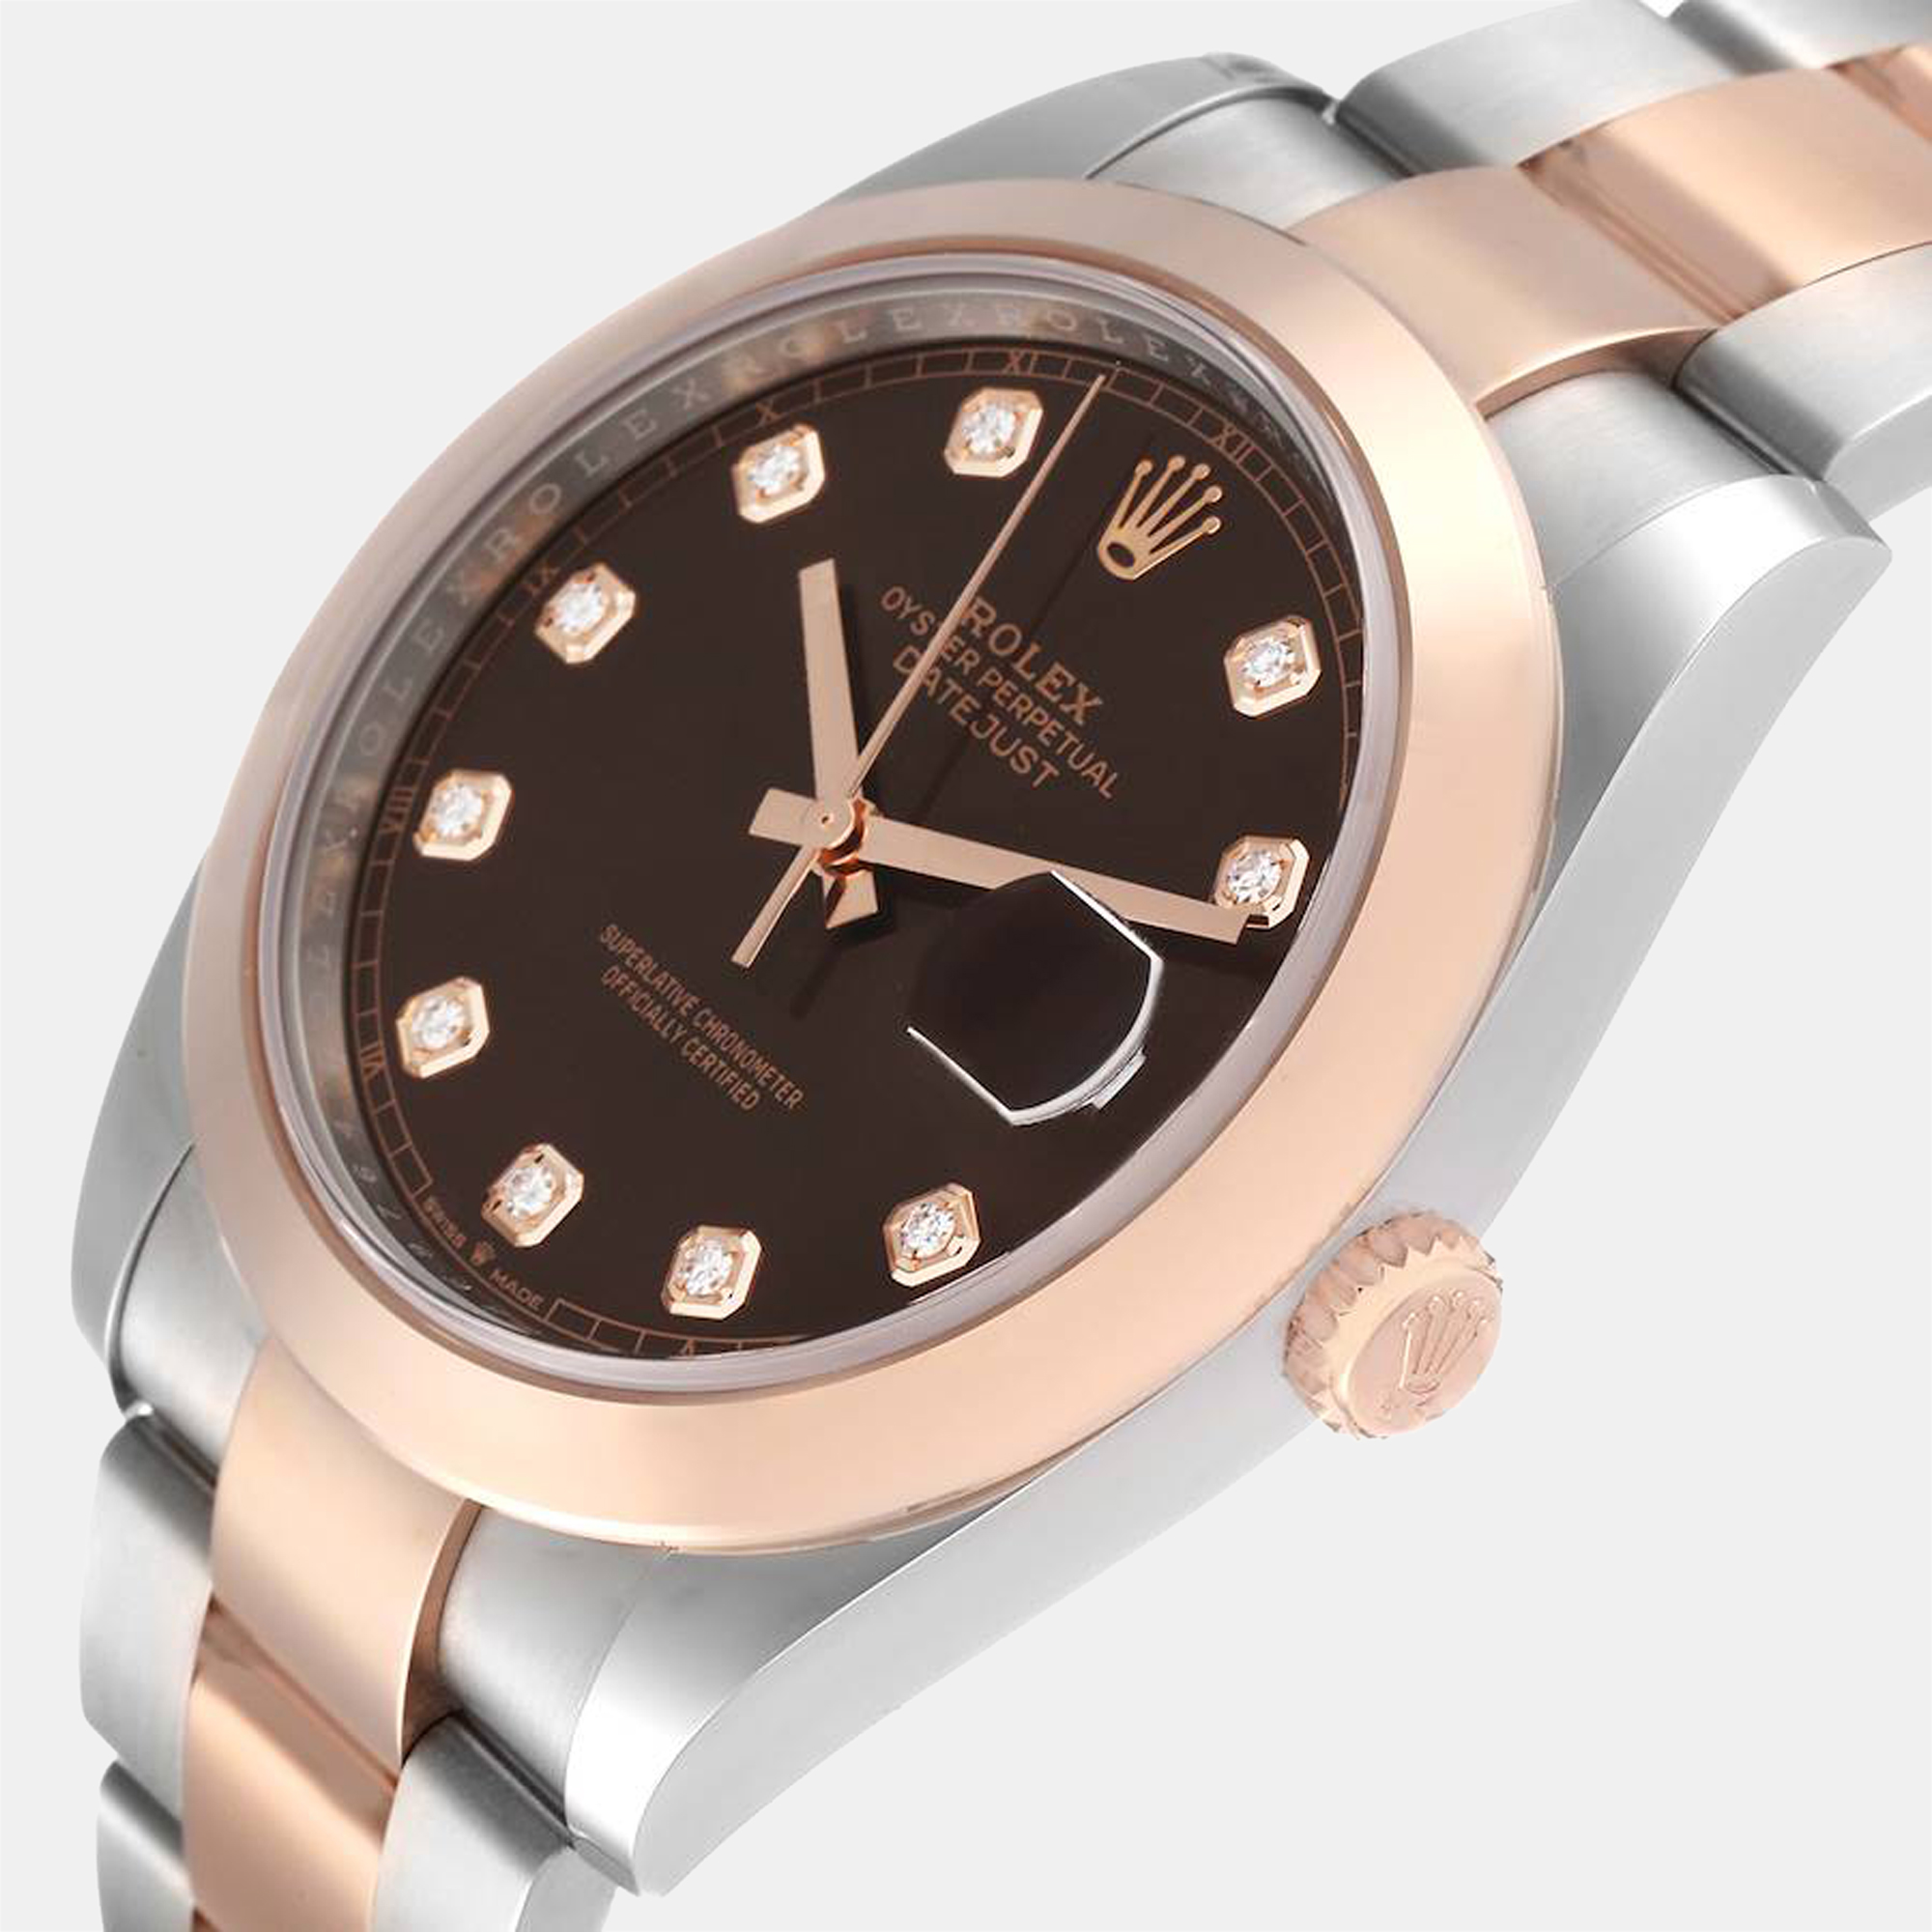 

Rolex Brown Diamonds 18K Rose Gold And Stainless Steel Datejust 126301 Automatic Men's Wristwatch 41 mm